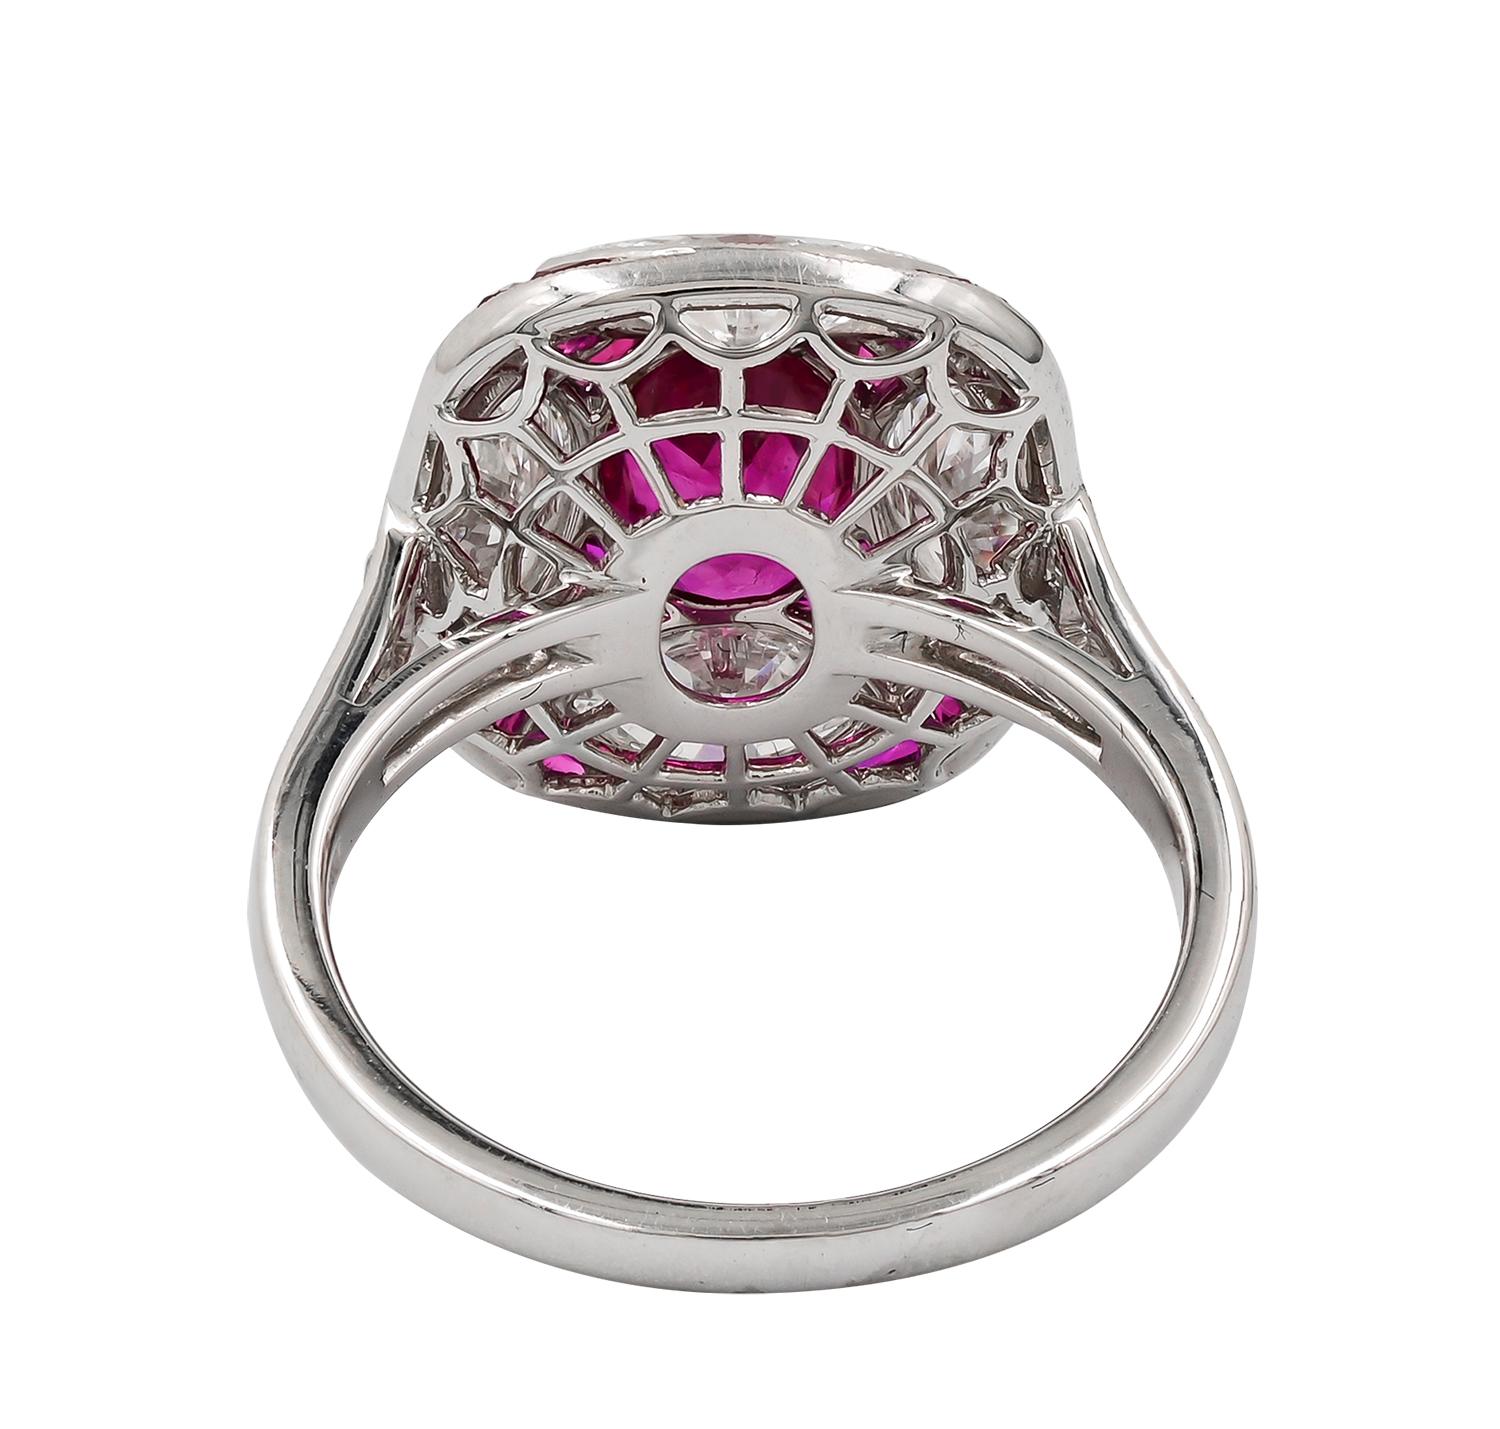 Sophia D, 1.51 Carat Ruby and Diamond Art Deco Style Ring in Platinum In New Condition For Sale In New York, NY